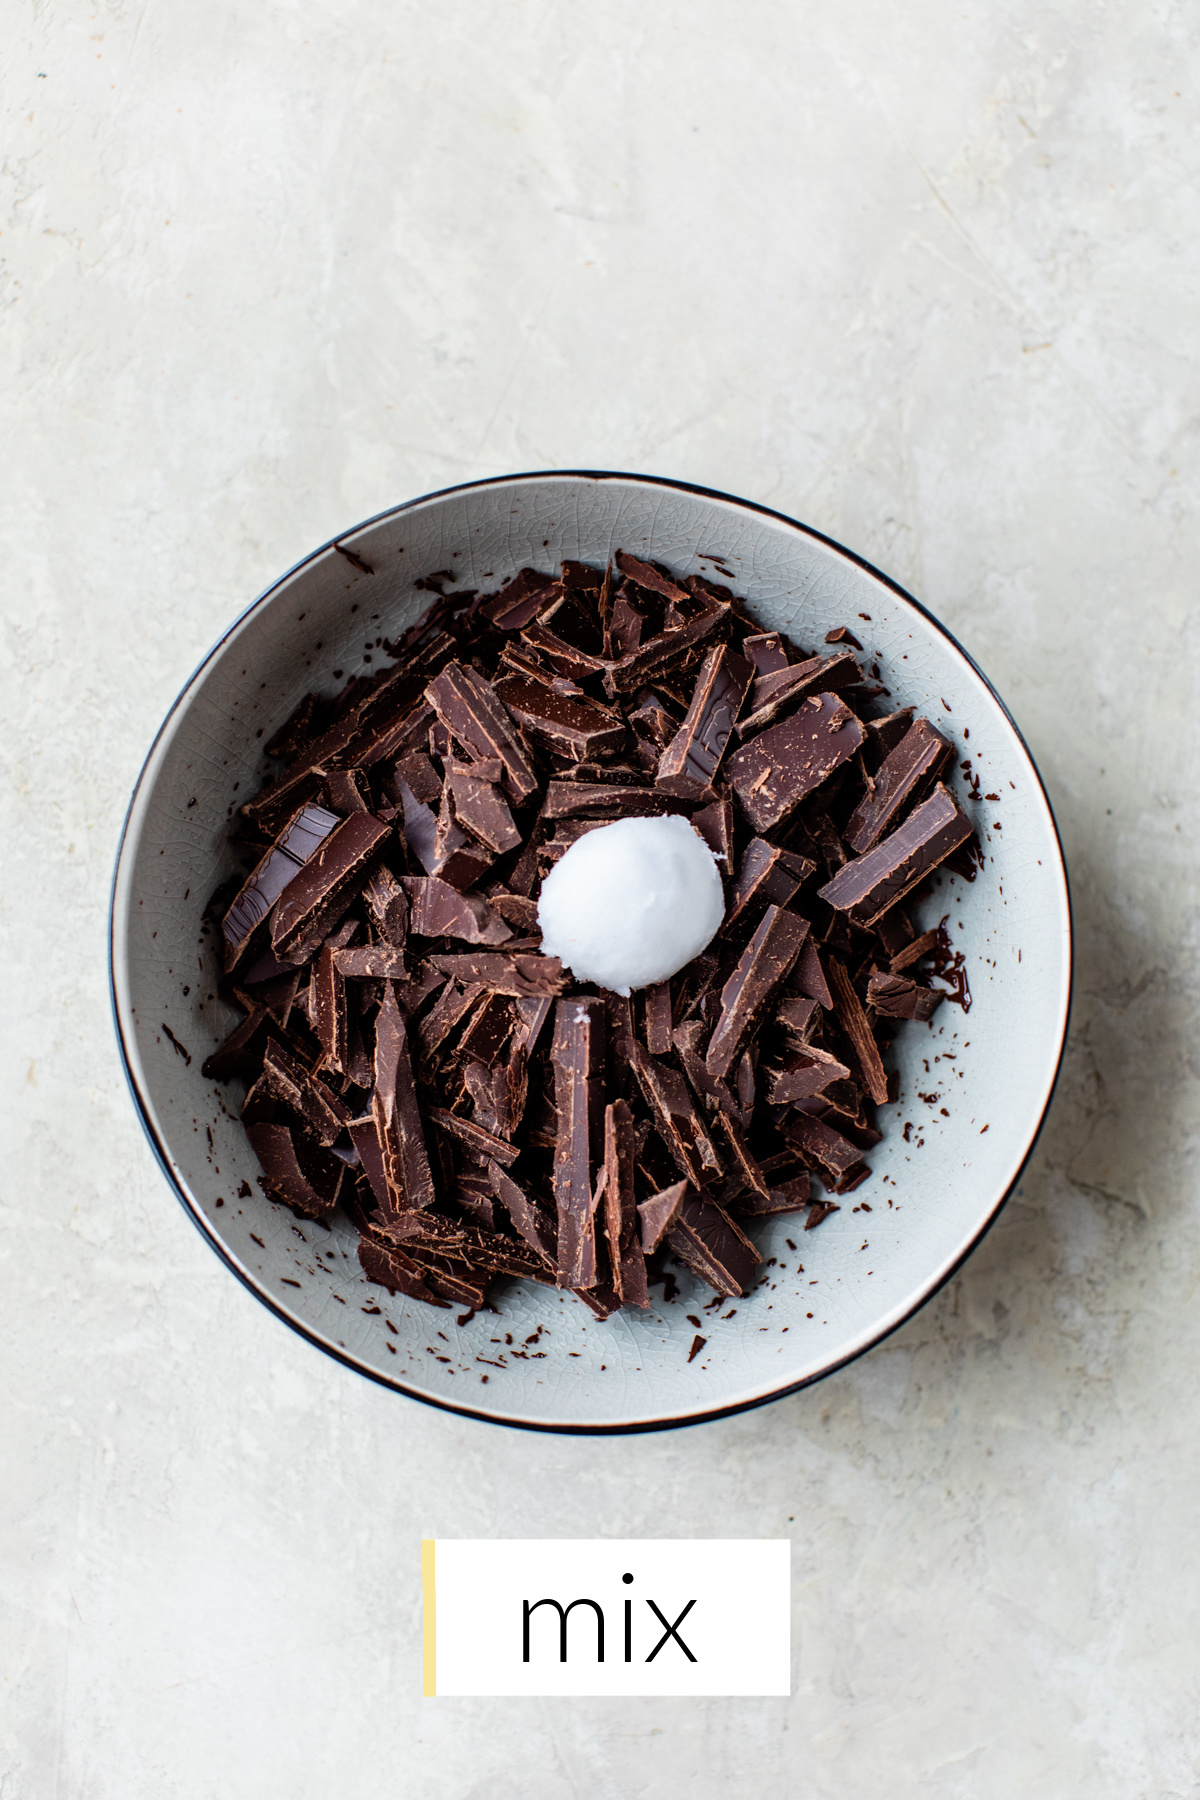 dark chocolate and coconut oil in a small white bowl.